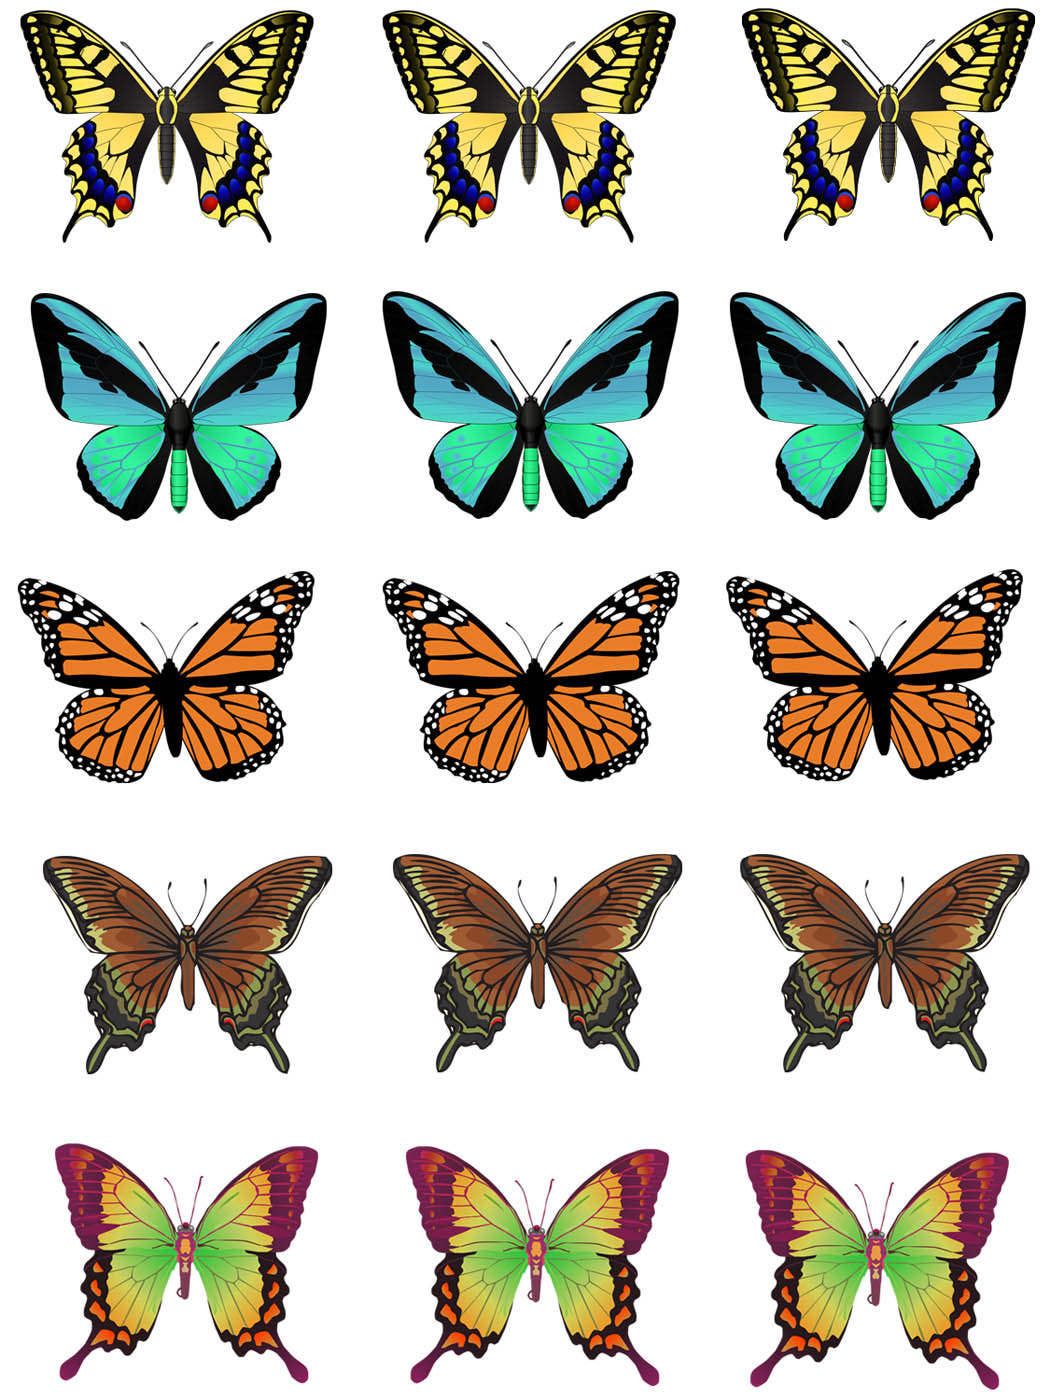 Butterfly Art Images - ClipArt Best